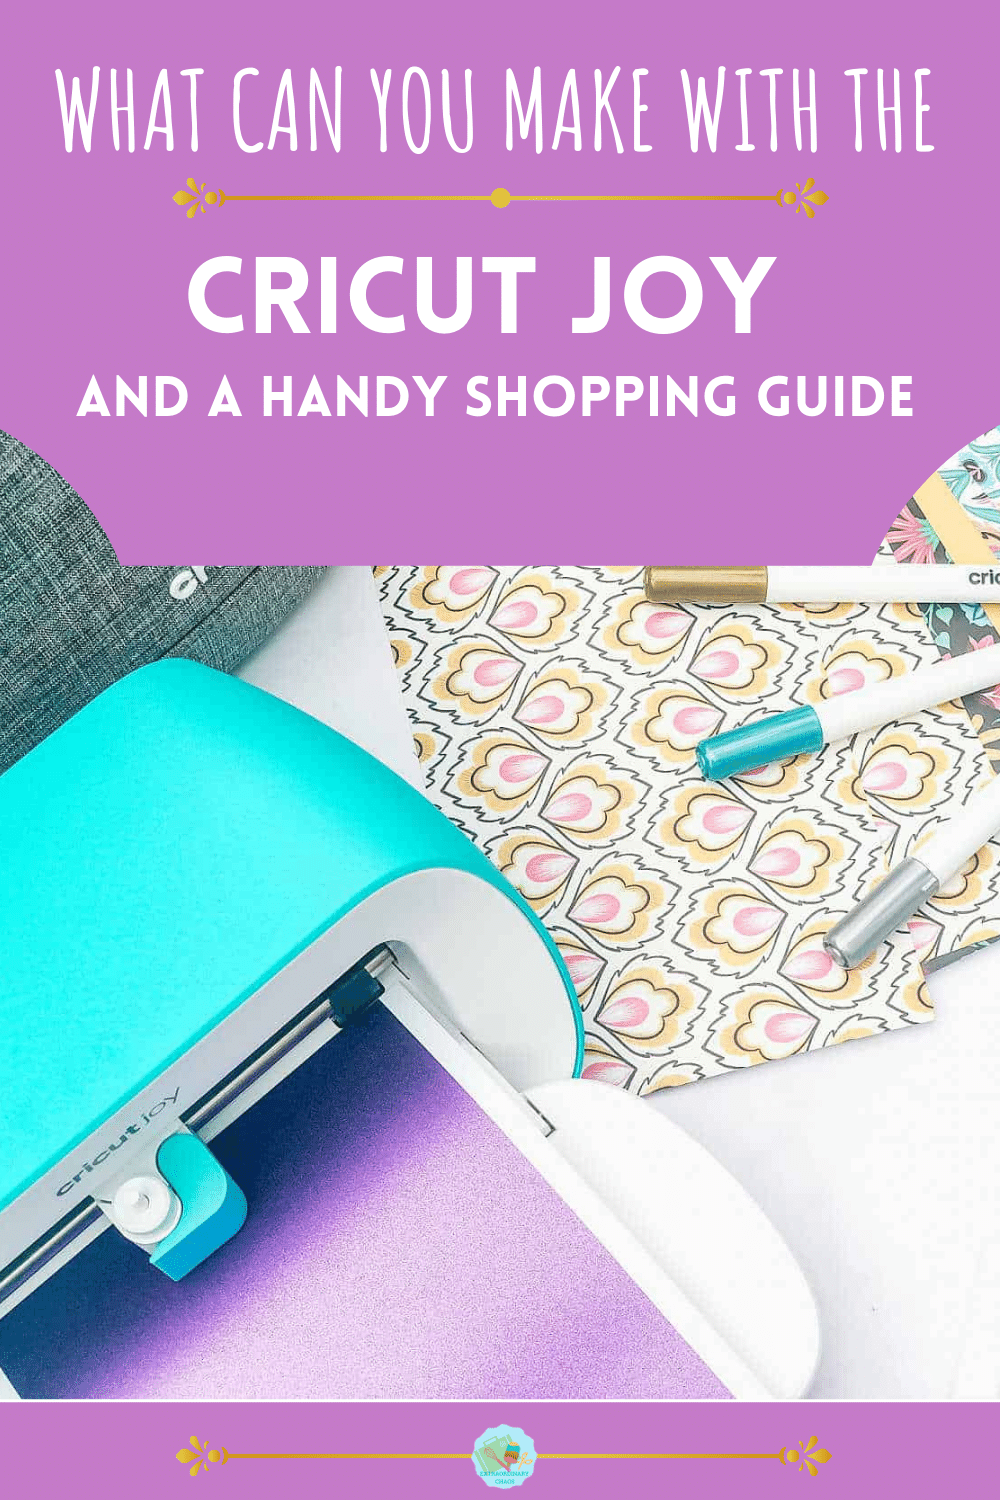 What can you make with the Cricut Joy and a Handy shopping guide